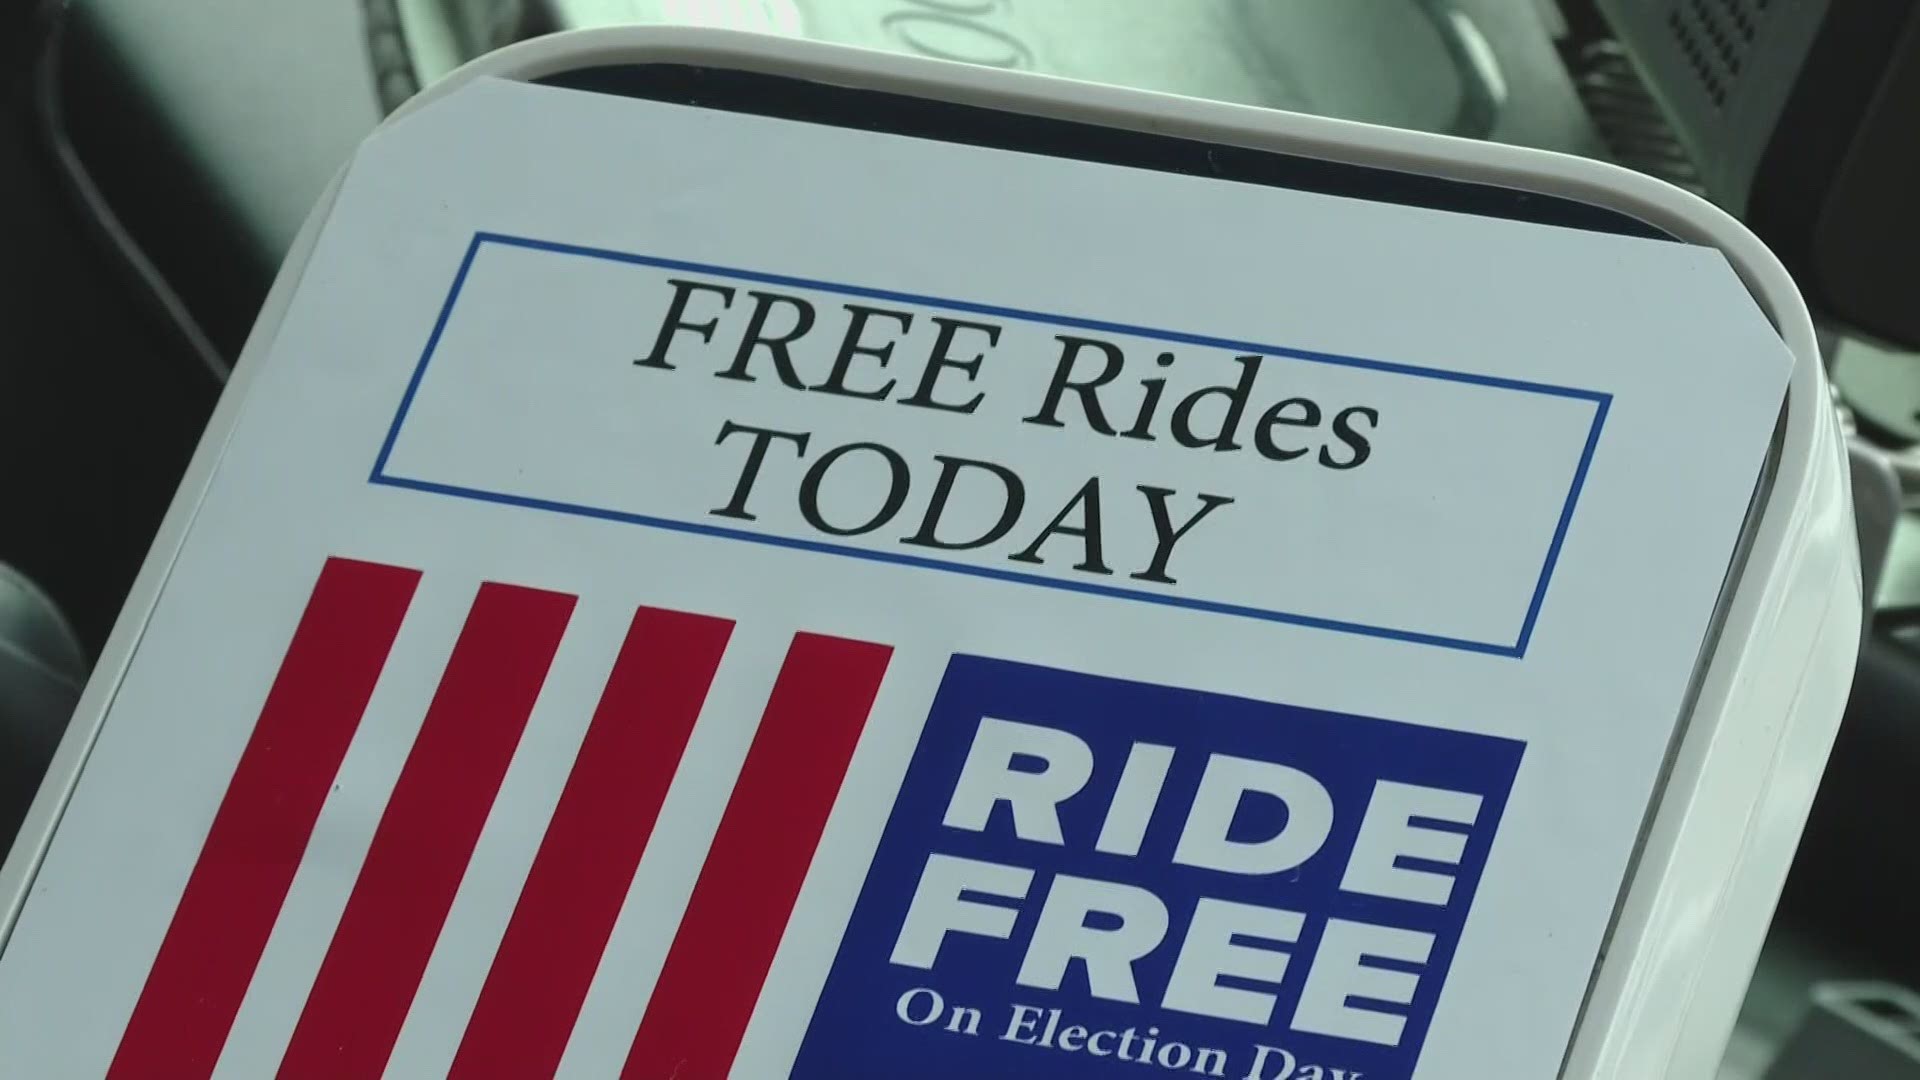 There are discounted and even free public transportation options to get to the polls in Maine.